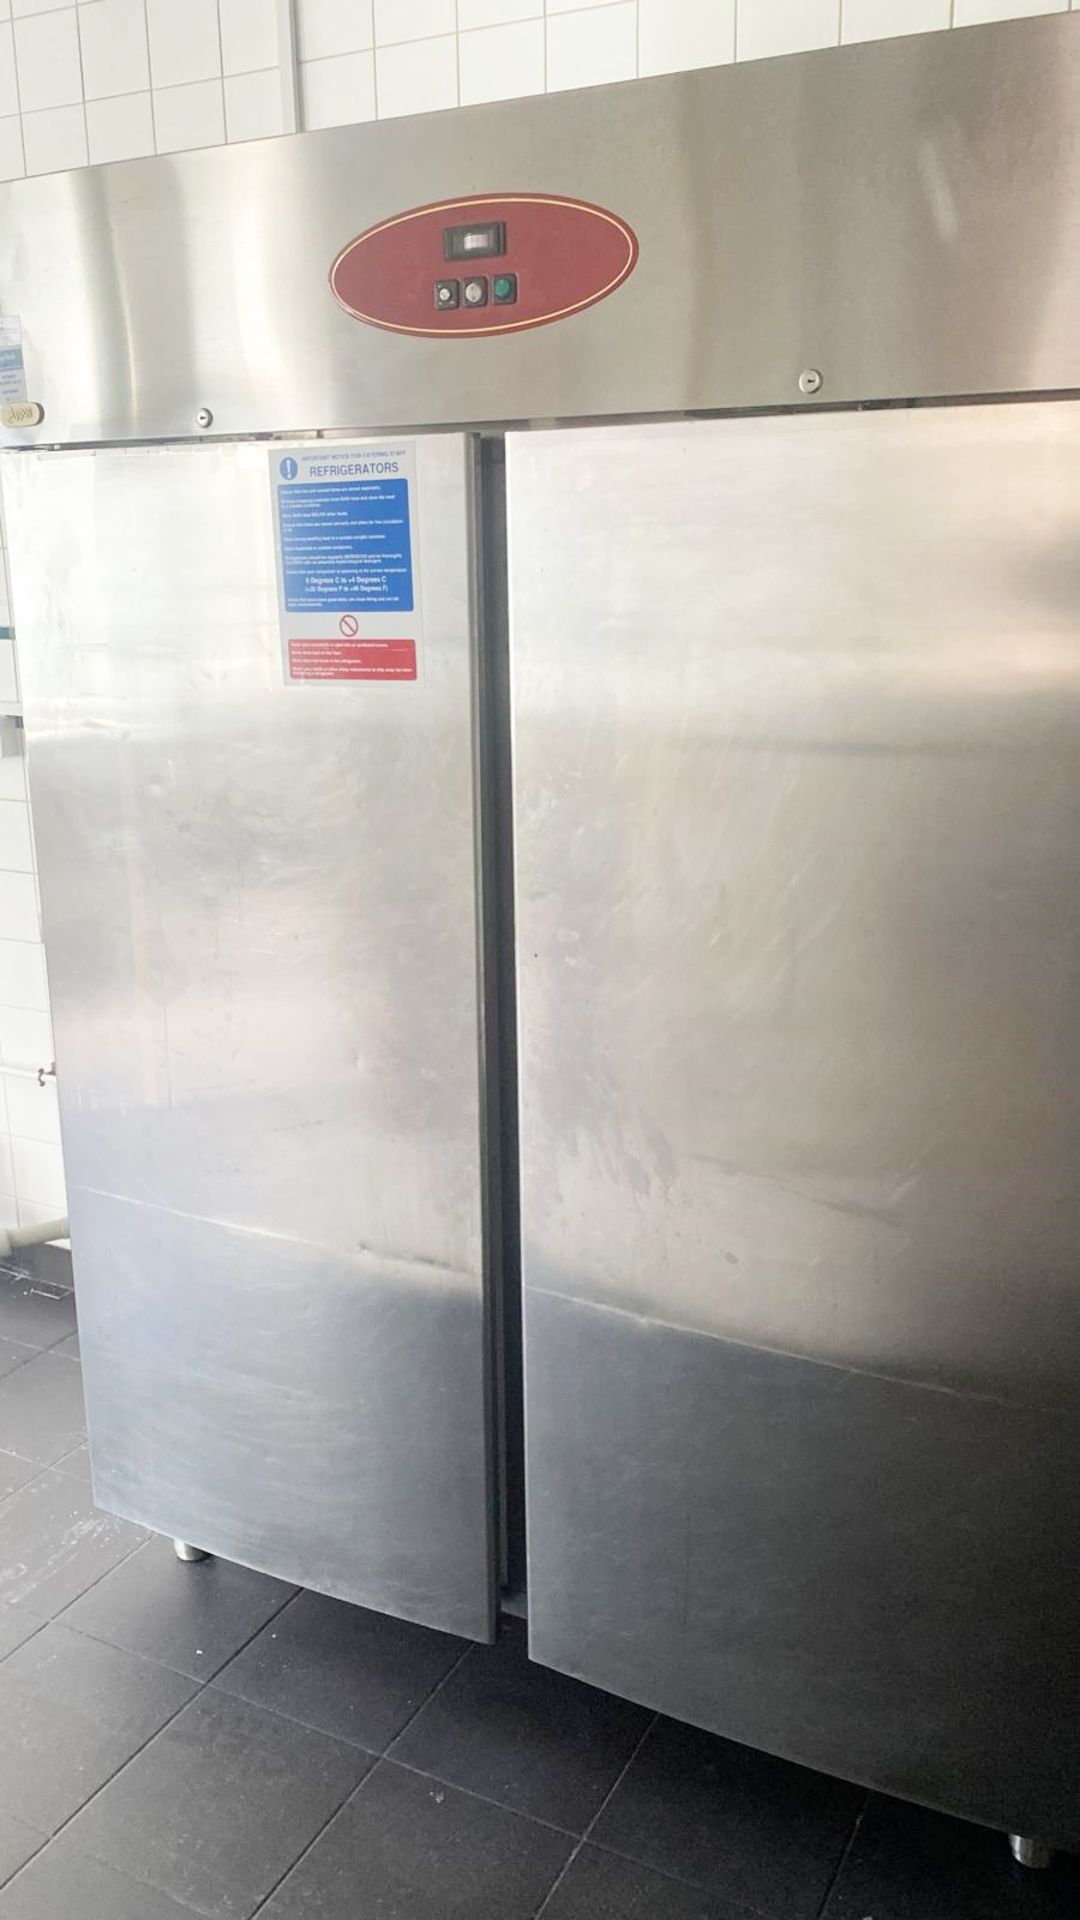 1 x Commercial Double Door Upright Refrigerator With Stainless Steel Exterior - Branded By Zoppas